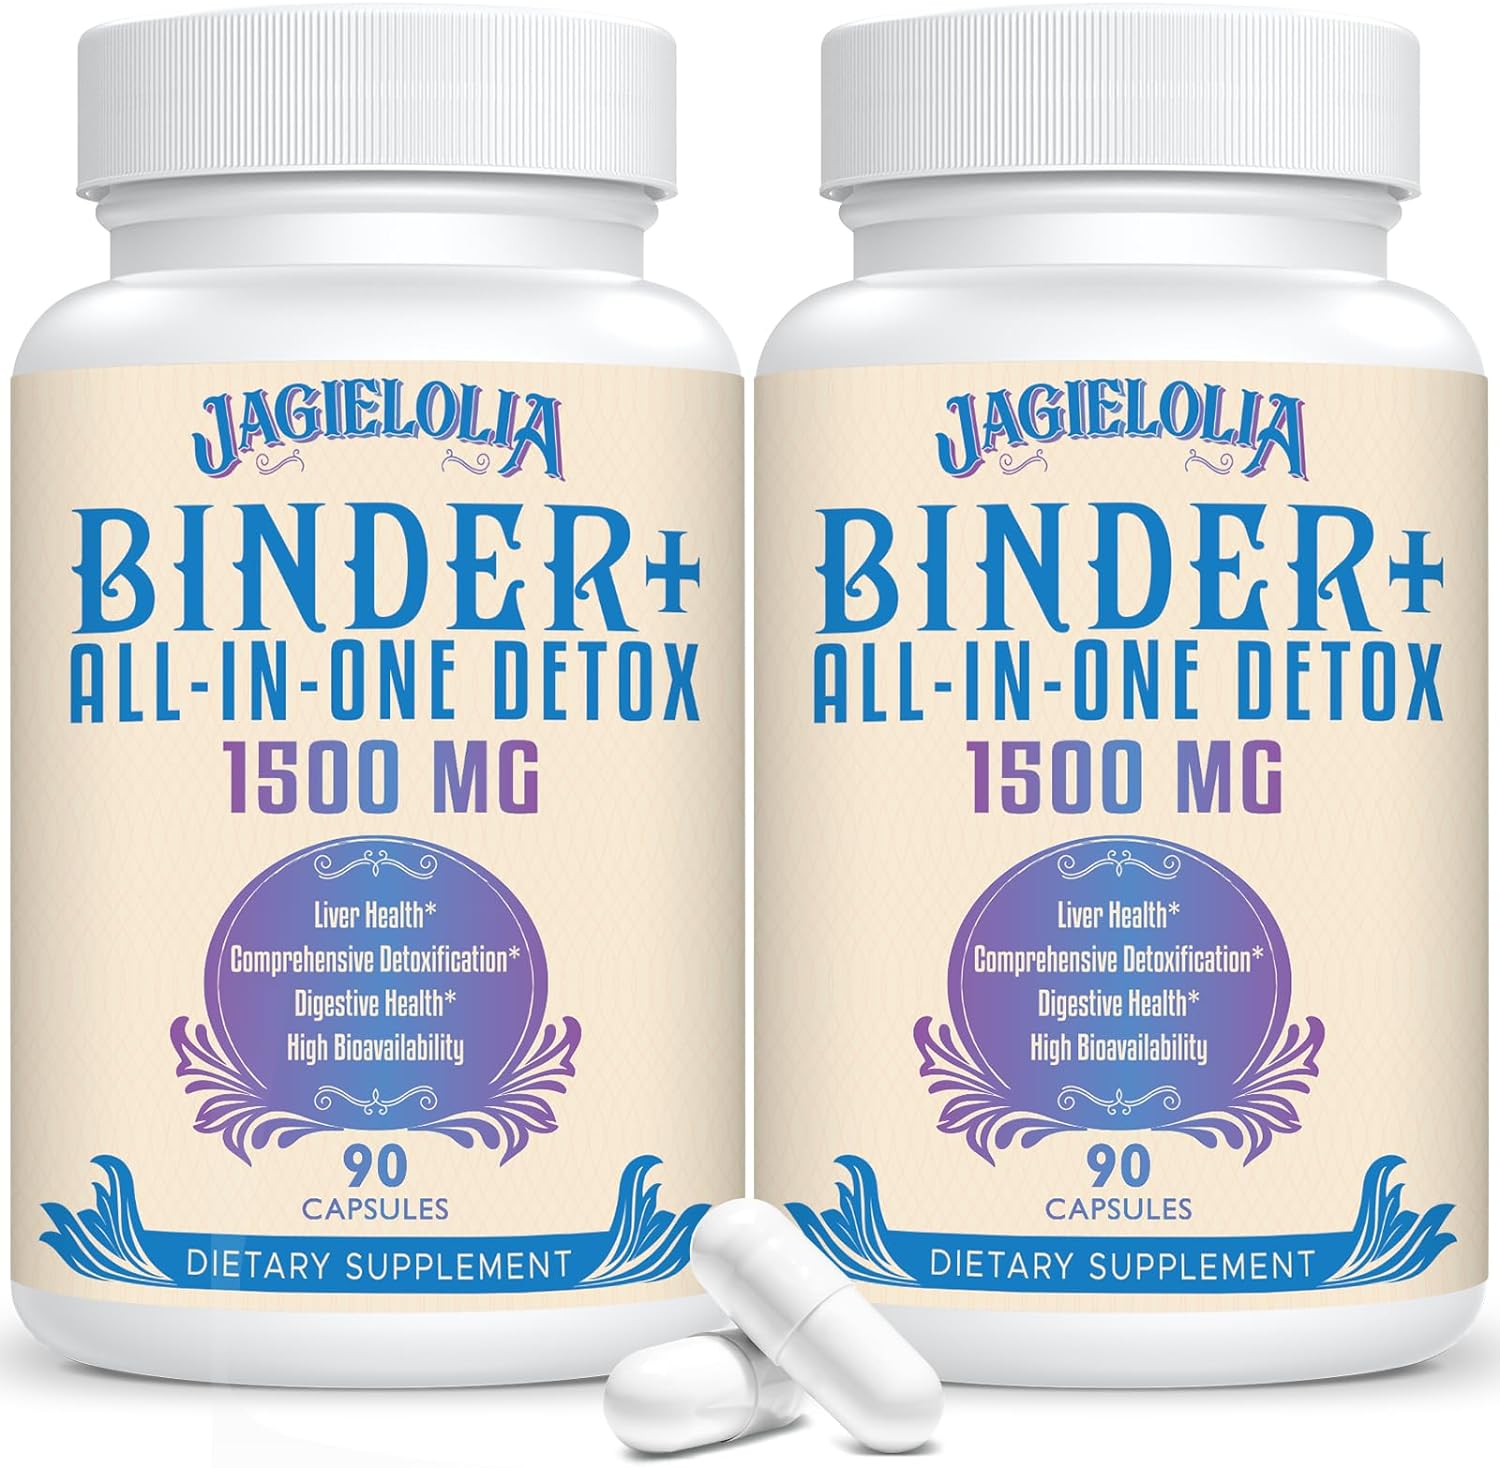 All-In-One Detox Binder Supplement 1500 MG – High Bioavailability